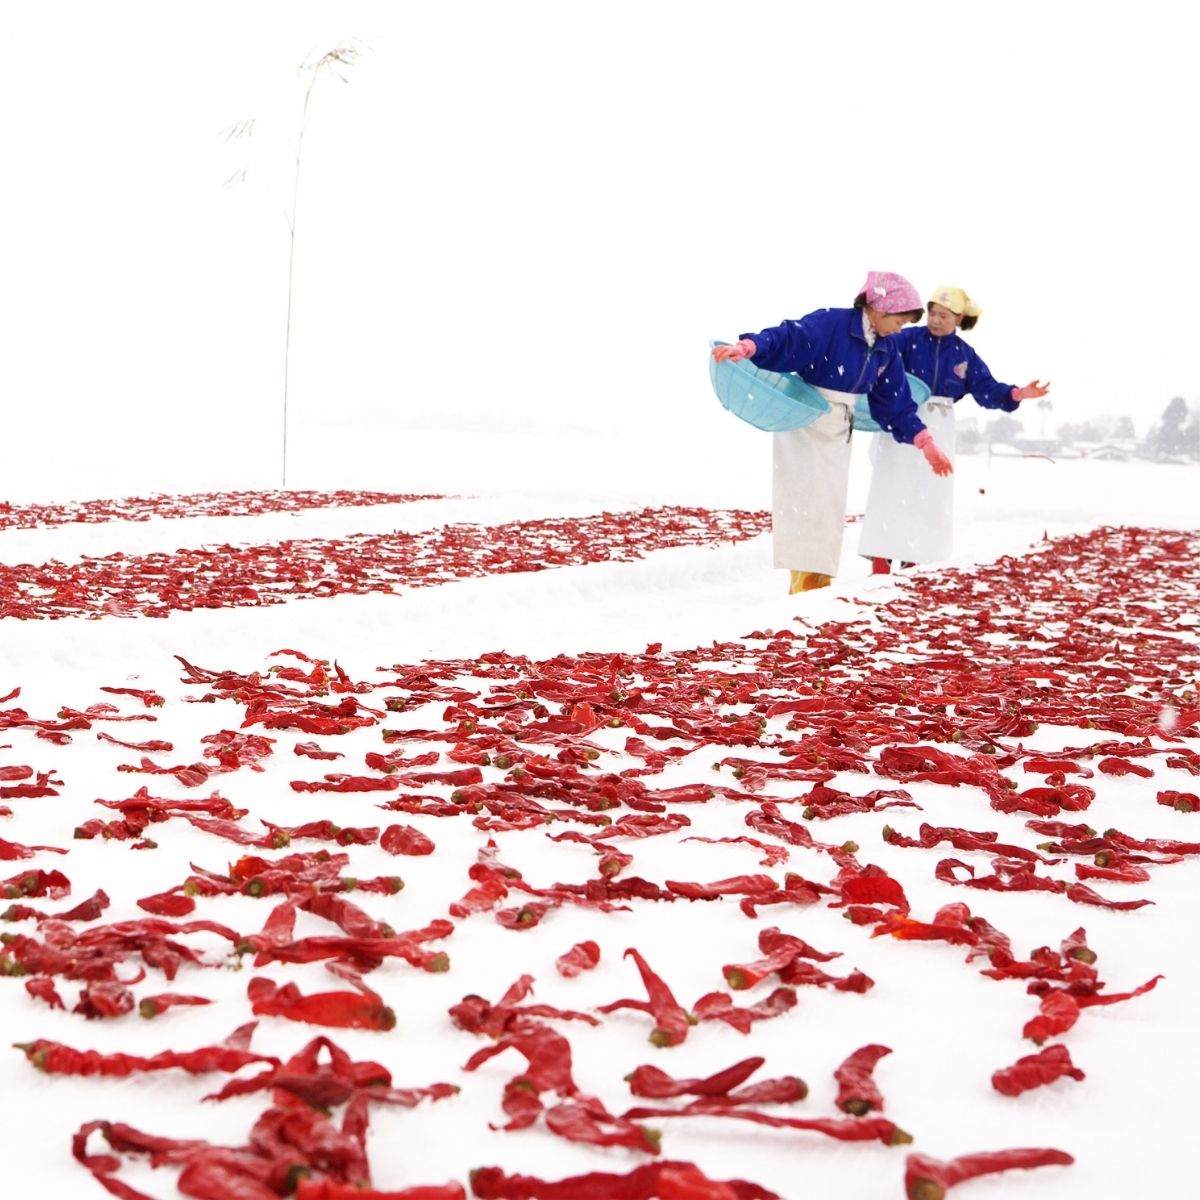 Women throwing chili peppers onto snow field